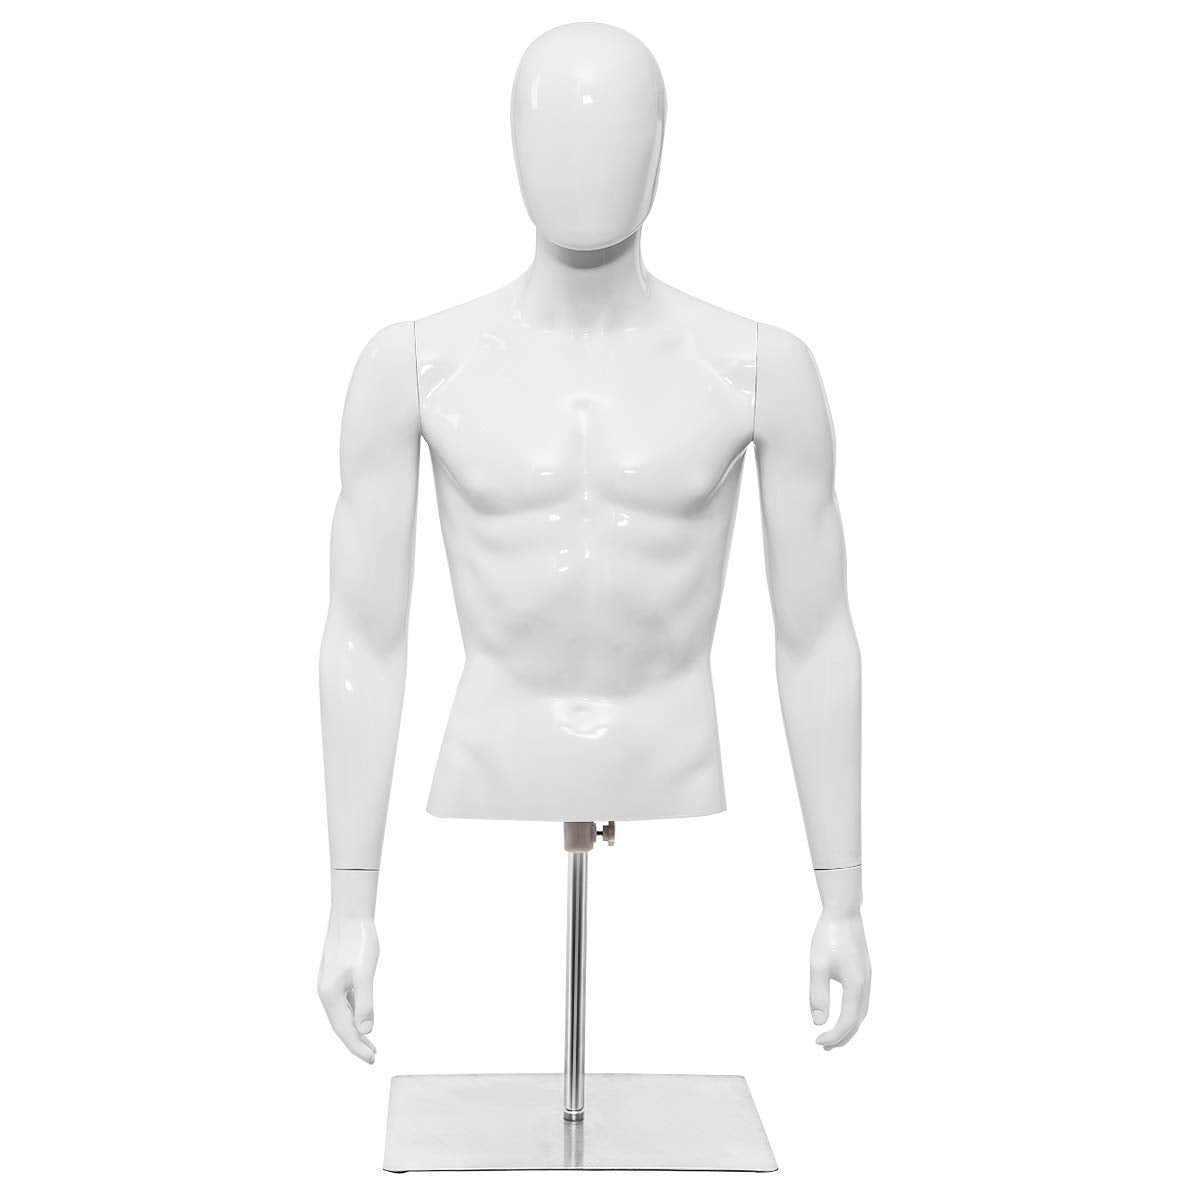  Giantex 6 Ft Male Mannequin, Adjustable Dress Mannequin Full  Body w/Separated Fingers, Stable Iron Base, Realistic Mannequin for Cosplay  : Industrial & Scientific